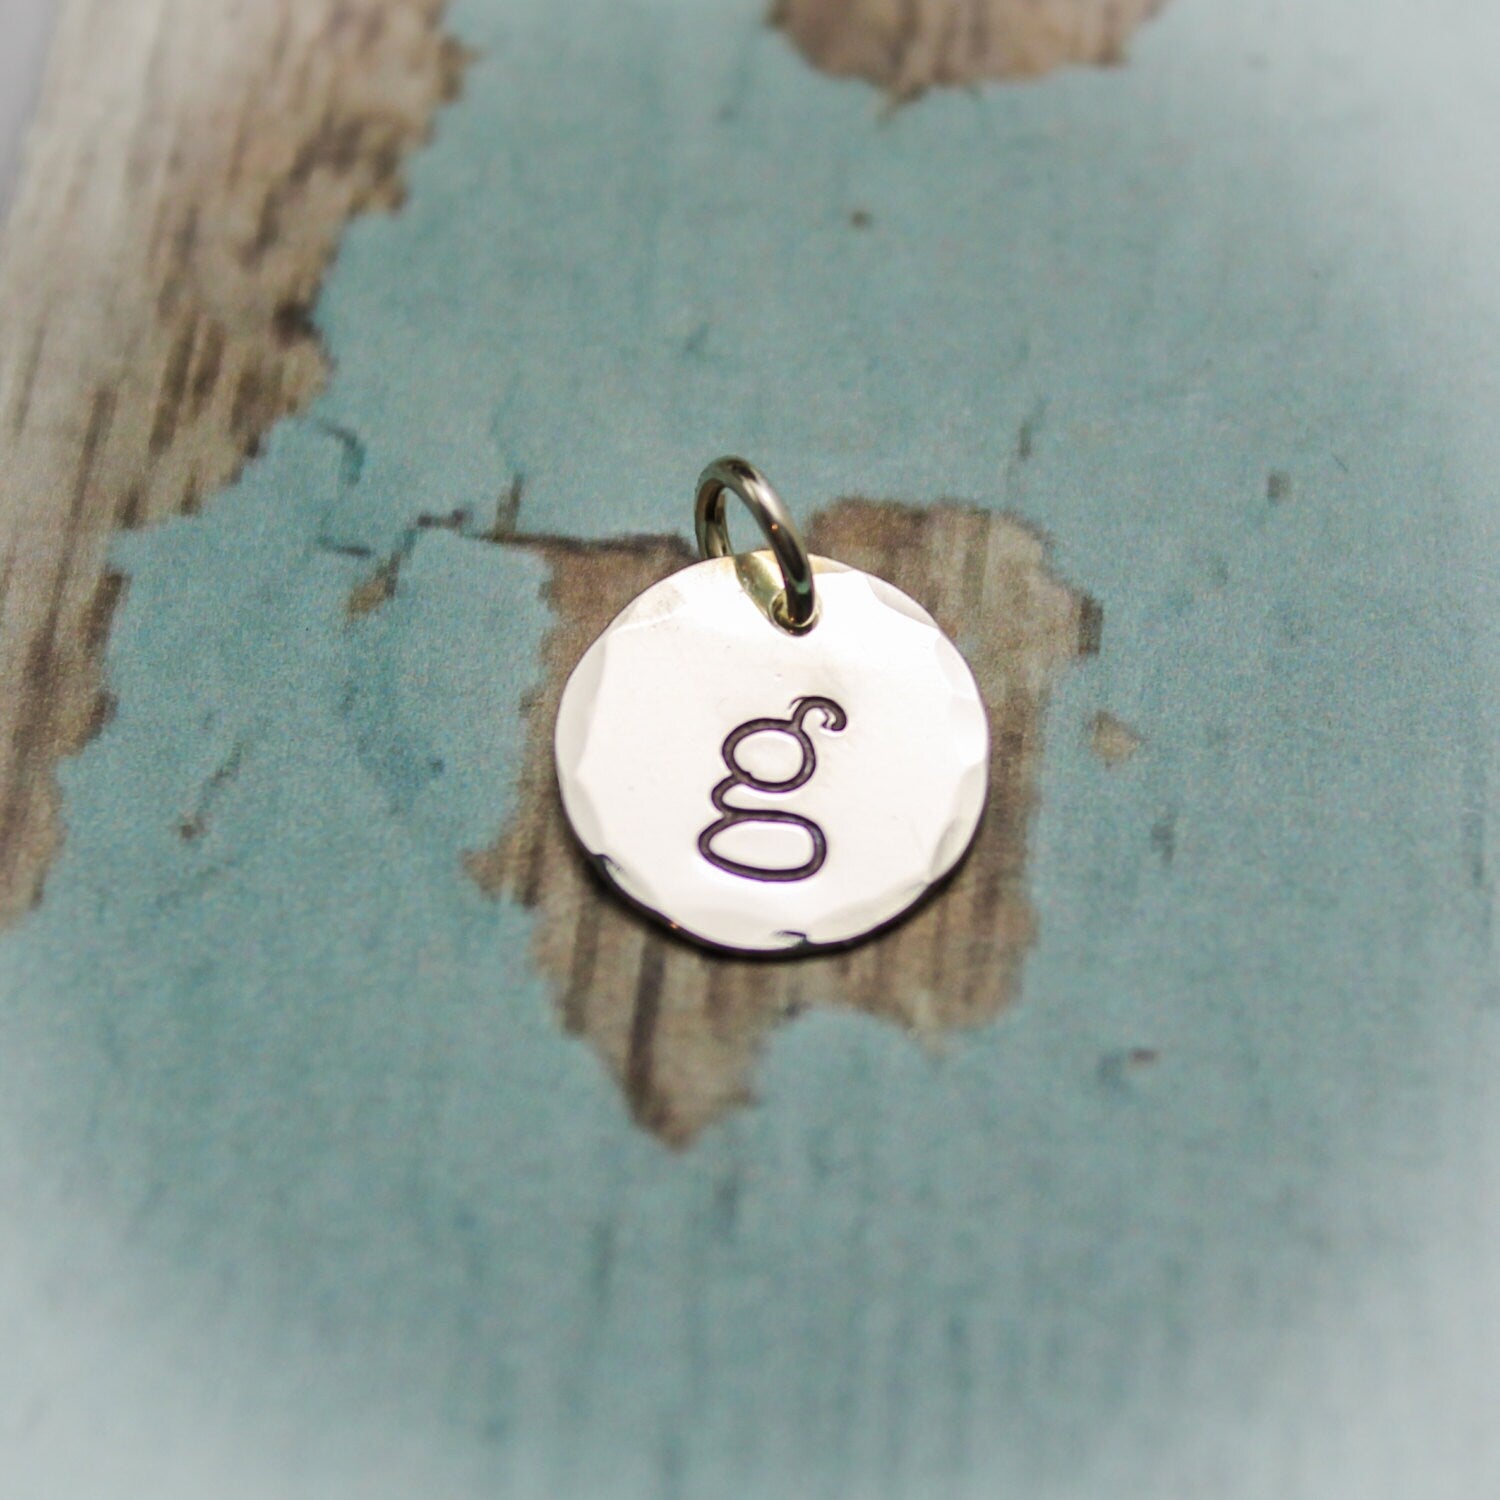 Personalized Initial Charm, Sterling Silver Disc Letter Charm, Letter Disc Charm, Alphabet Charm, Hand Stamped Initial Charm, Silver Letter